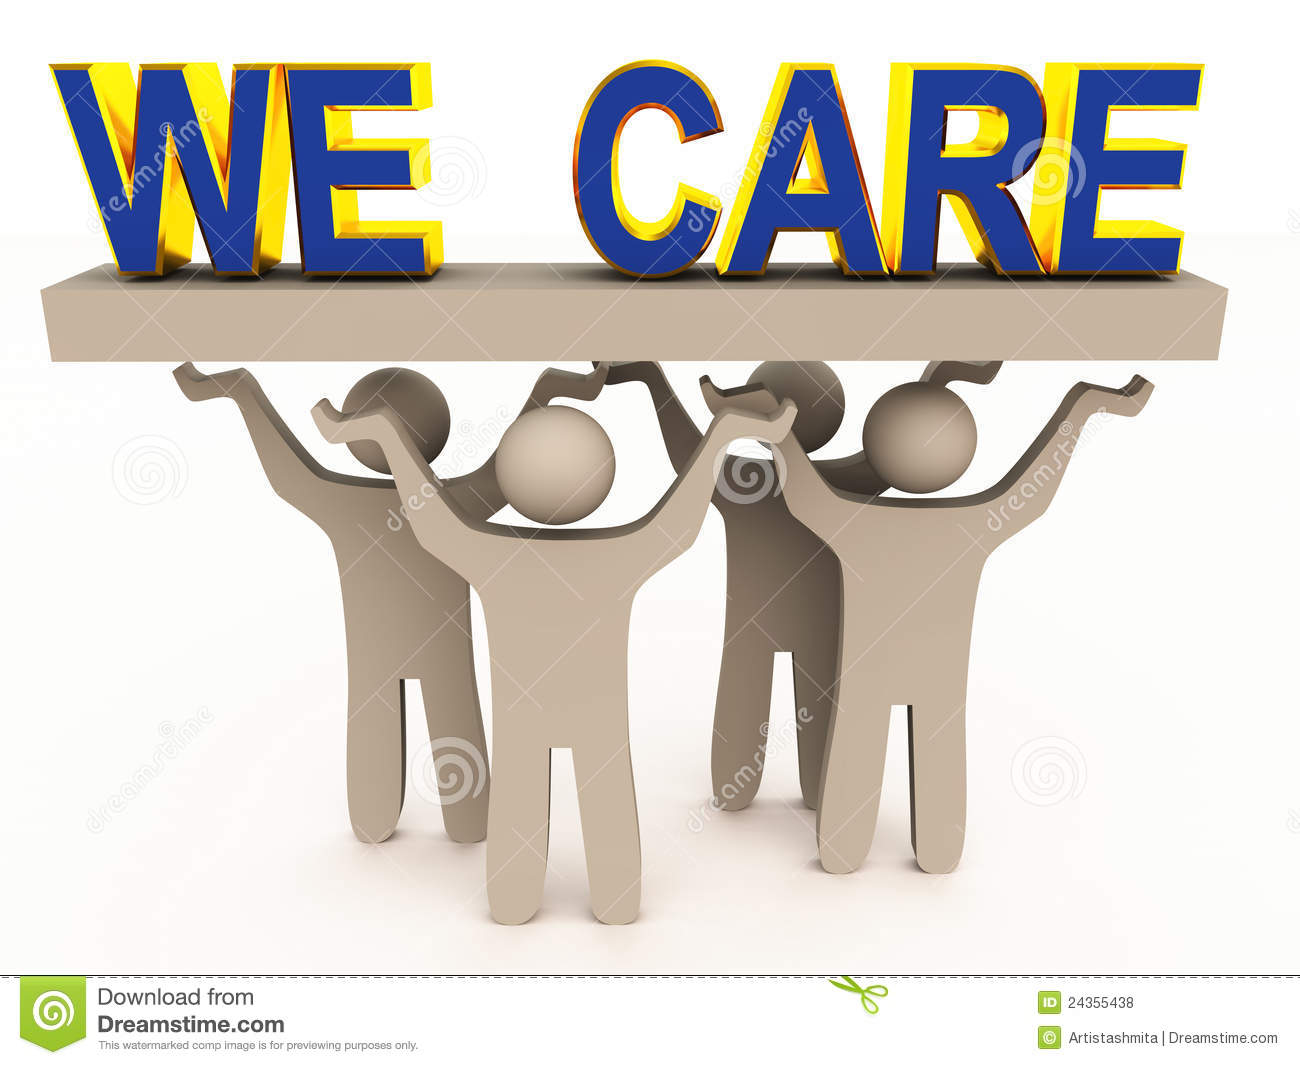 Customer Care Concept Image With Figures Holding We Care Words On A